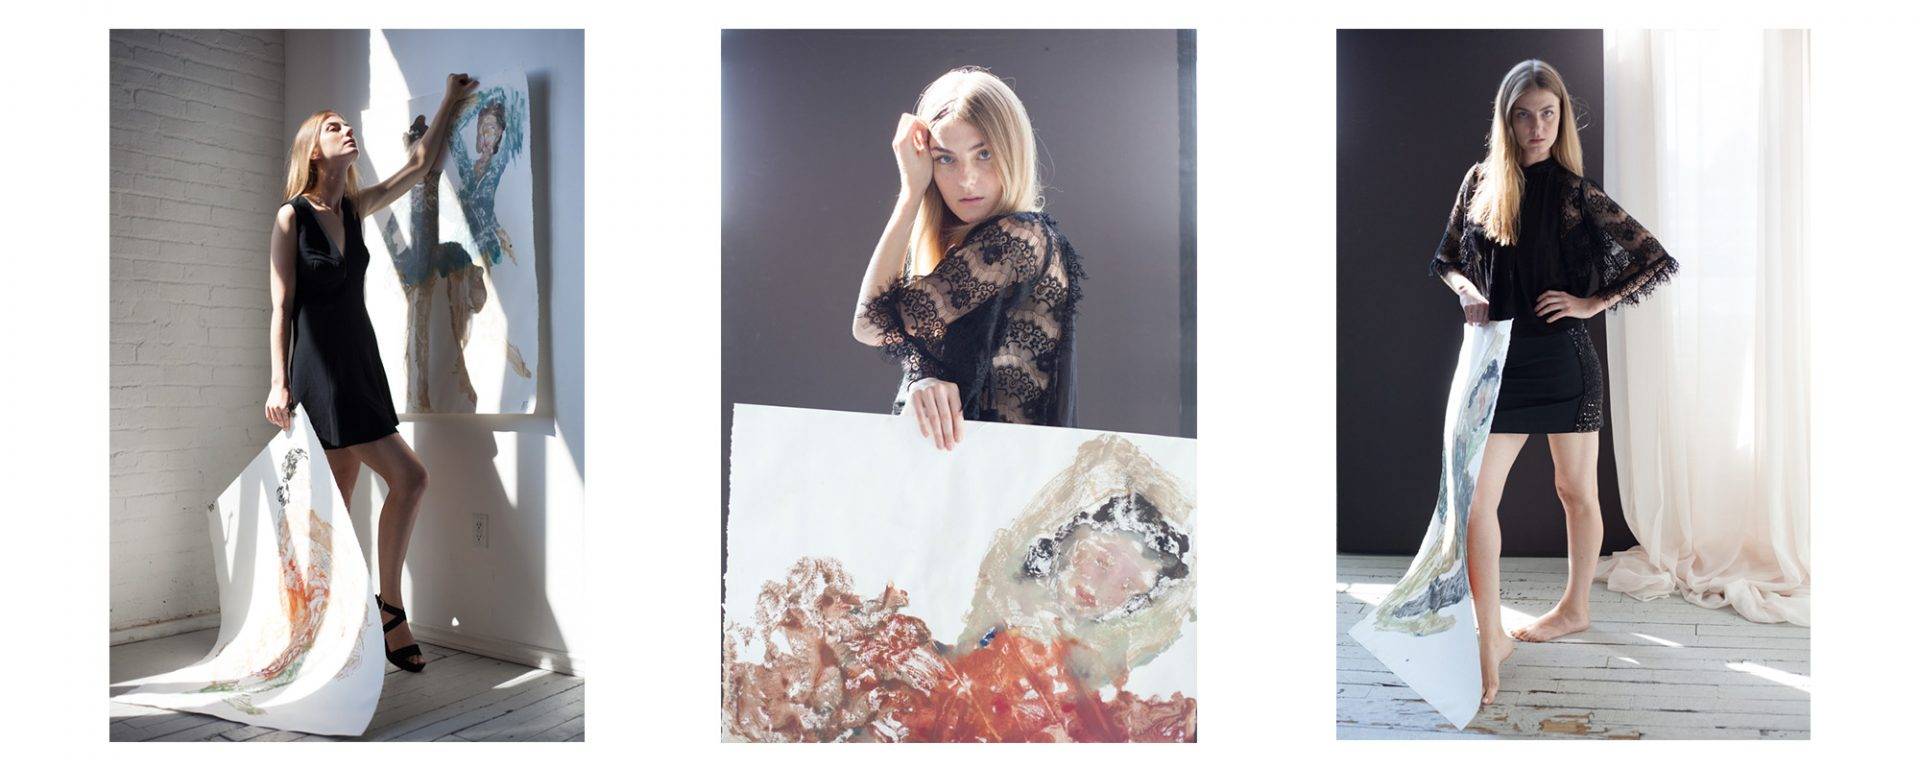 Portraits of an artist with her masterpieces.